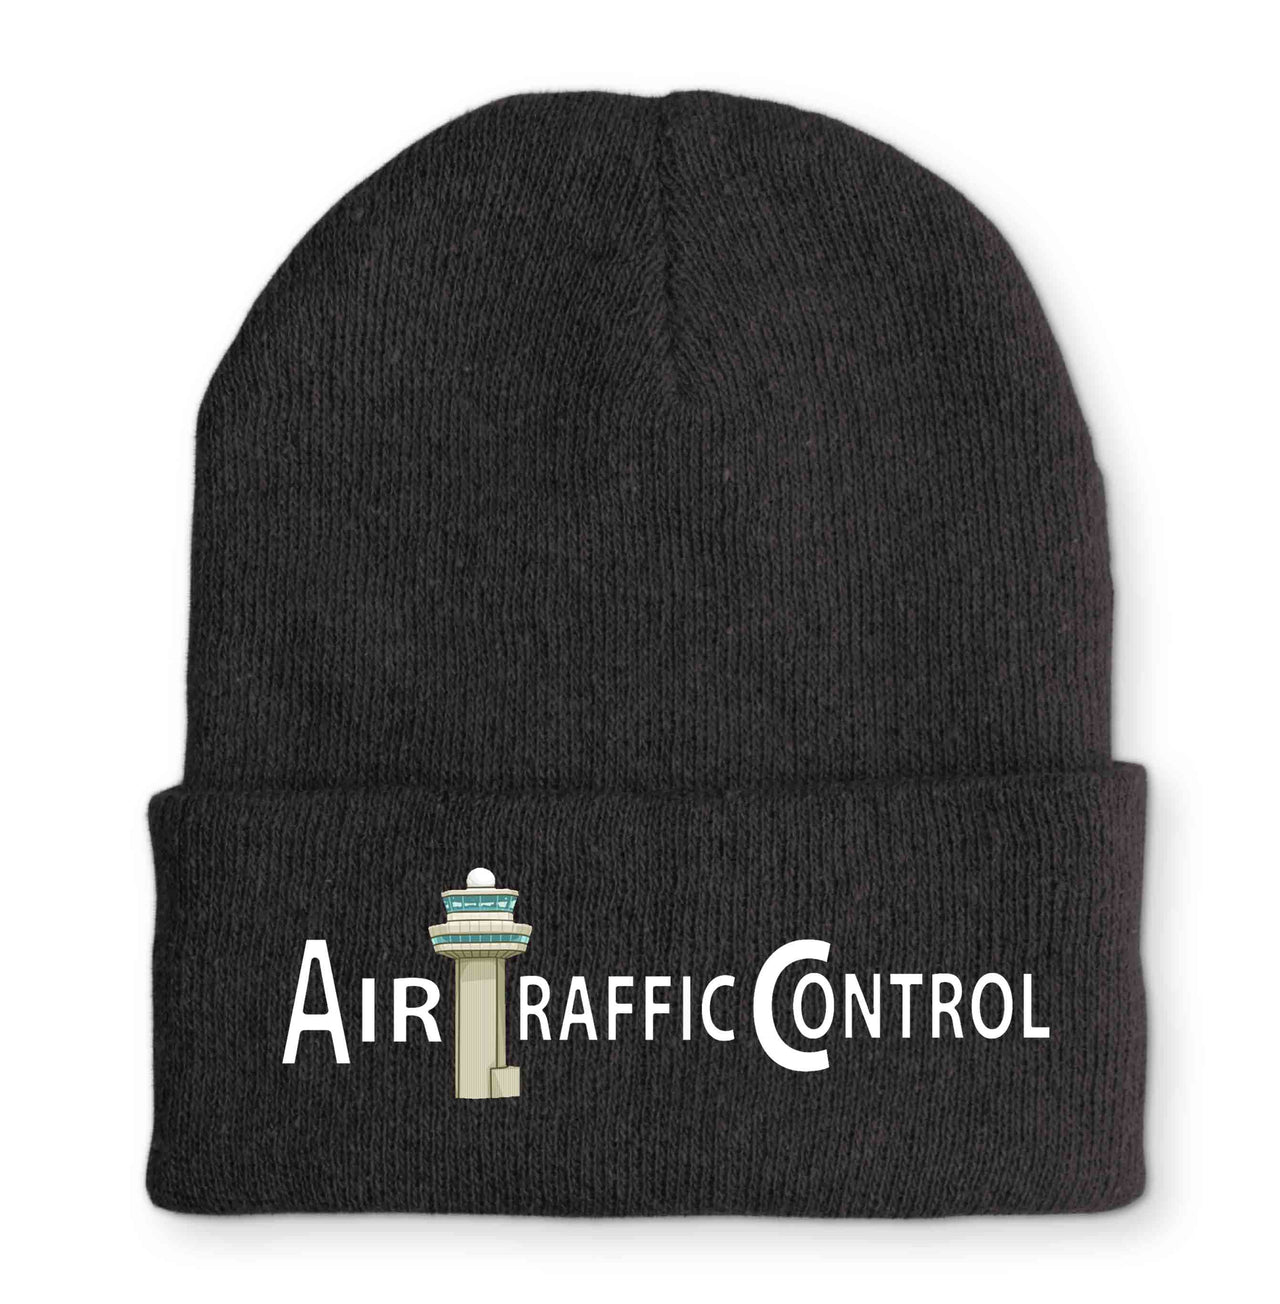 Air Traffic Control Embroidered Beanies